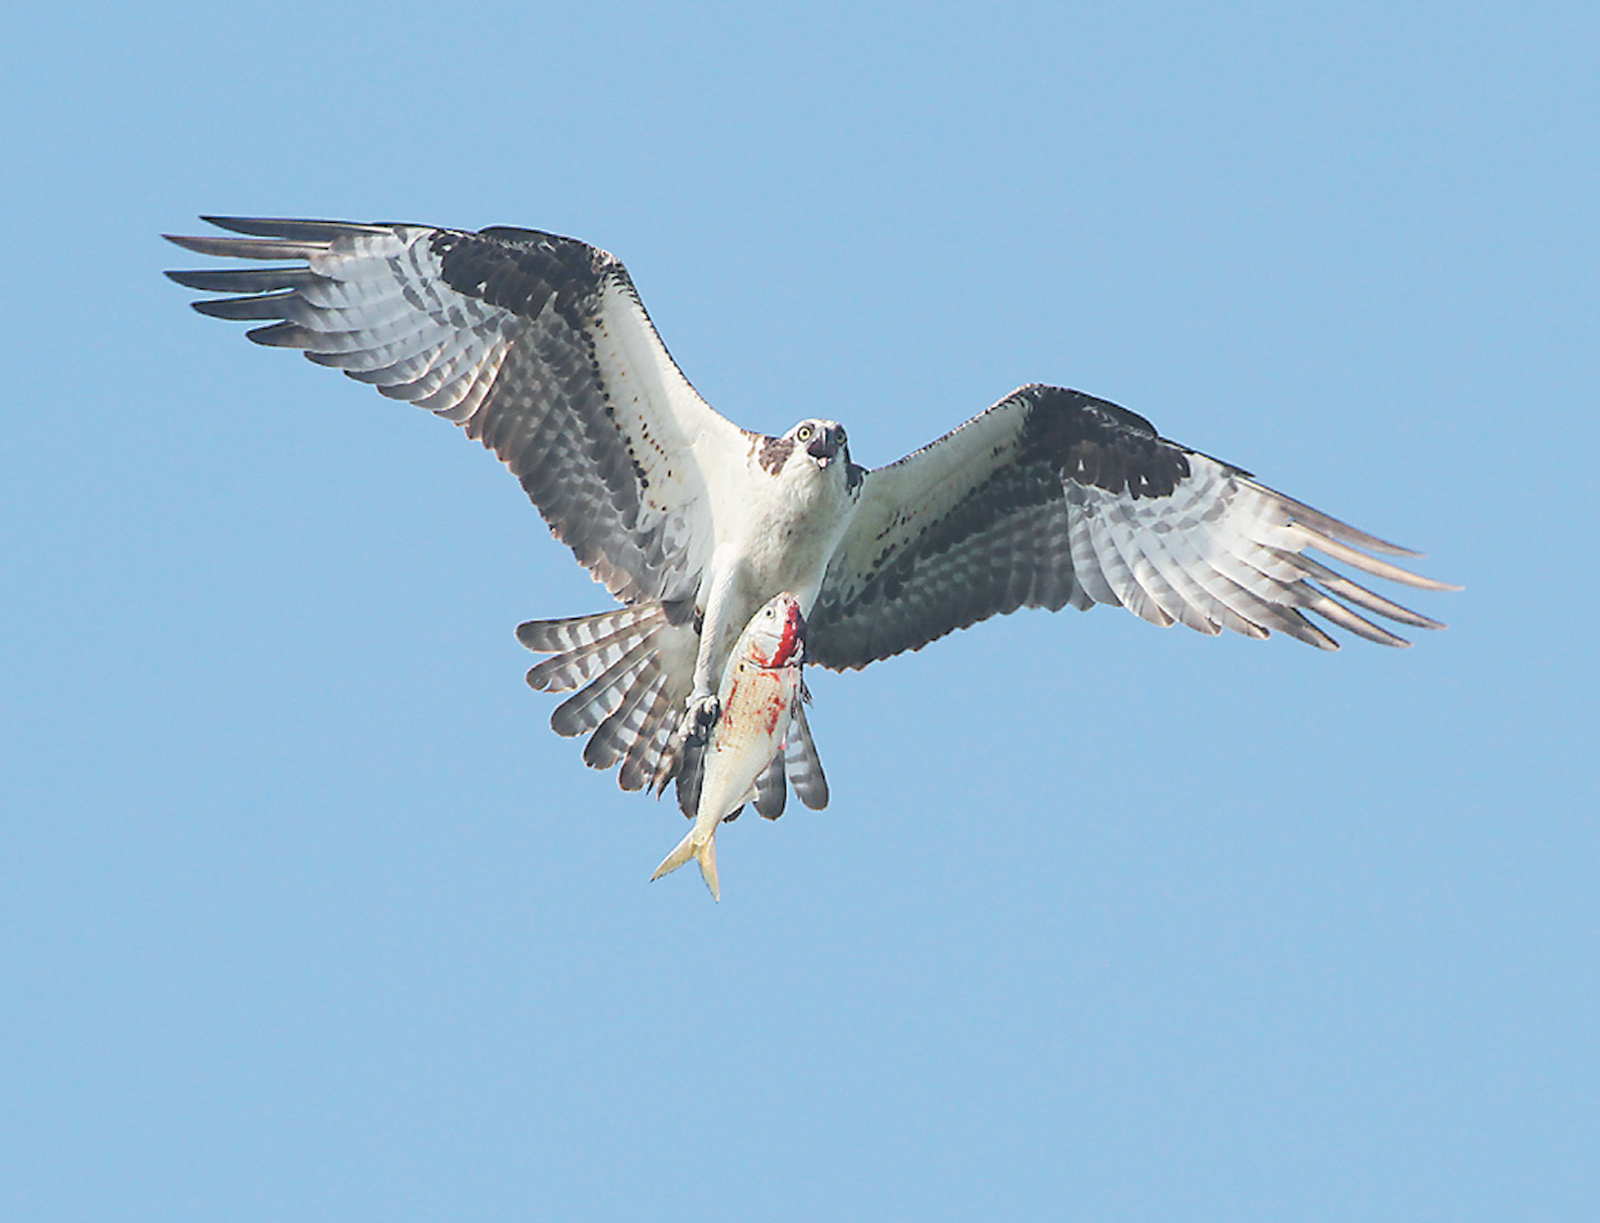 An adult osprey carrying a fish to feed its family in the nest, Jamaica Bay Wildlife Refuge; from Leslie Day’s Field Guide to the Neighborhood Birds of New York City